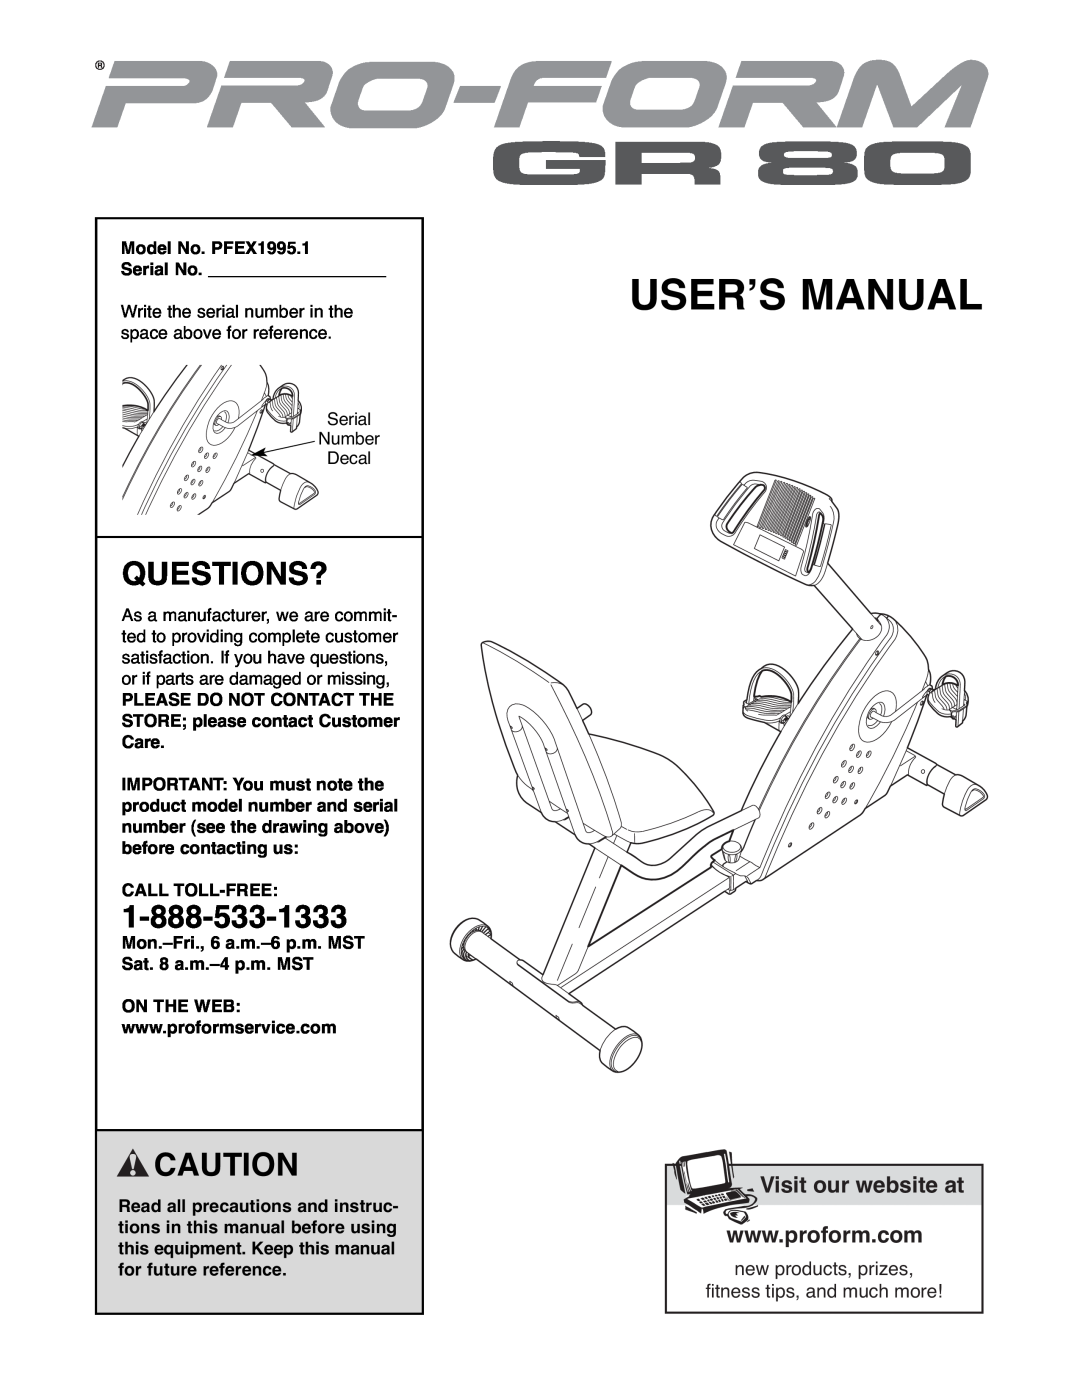 ProForm PFEX1995.1 user manual Questions?, User’S Manual, Visit our website at 